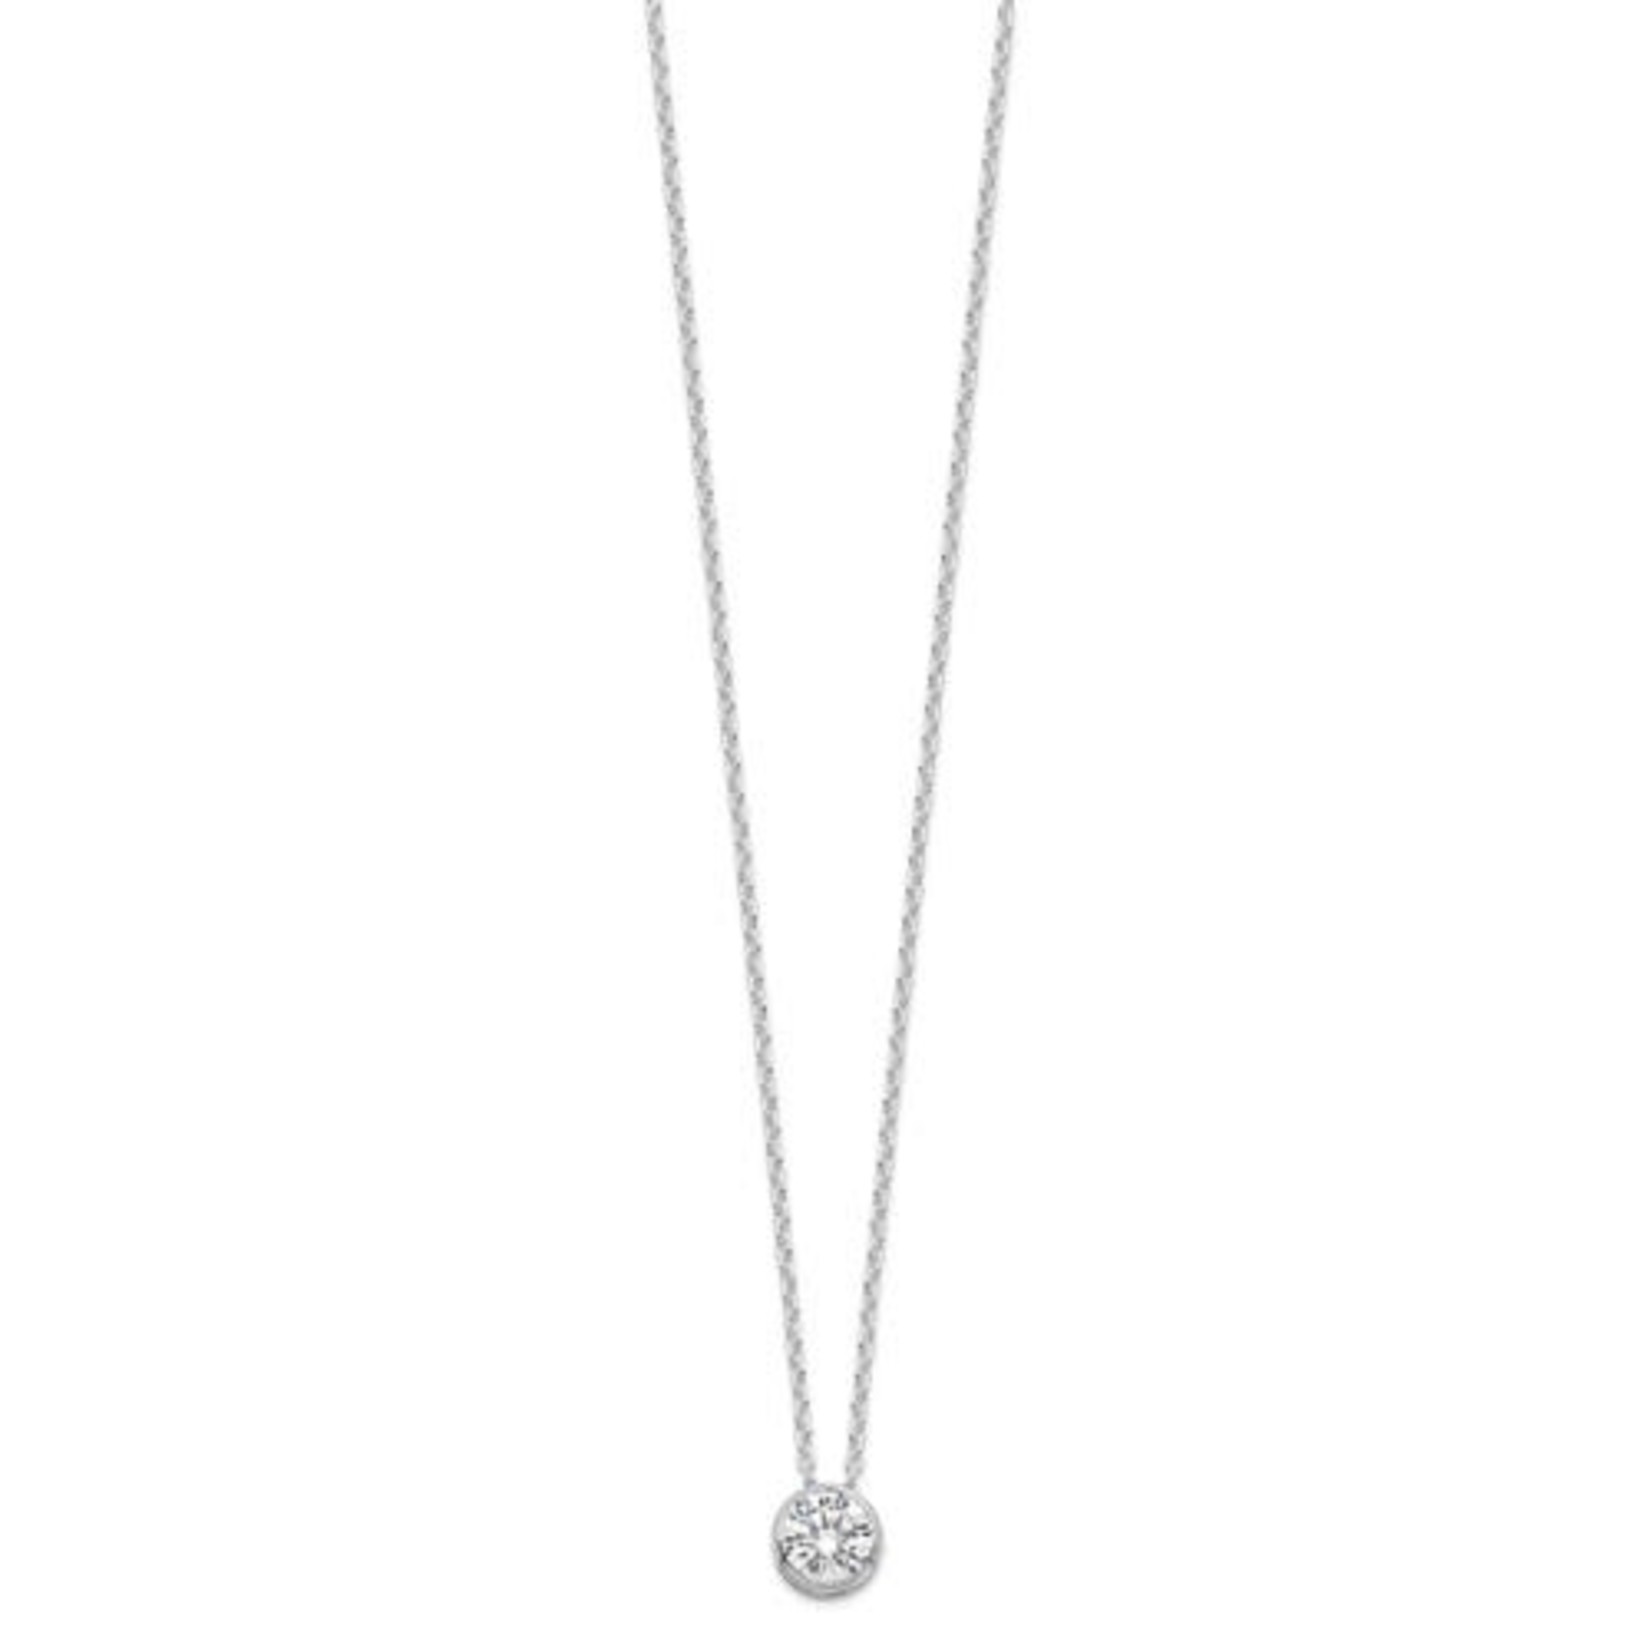 This Is Life Sterling Silver Rhodium-plated 8mm Bezel CZ Necklace